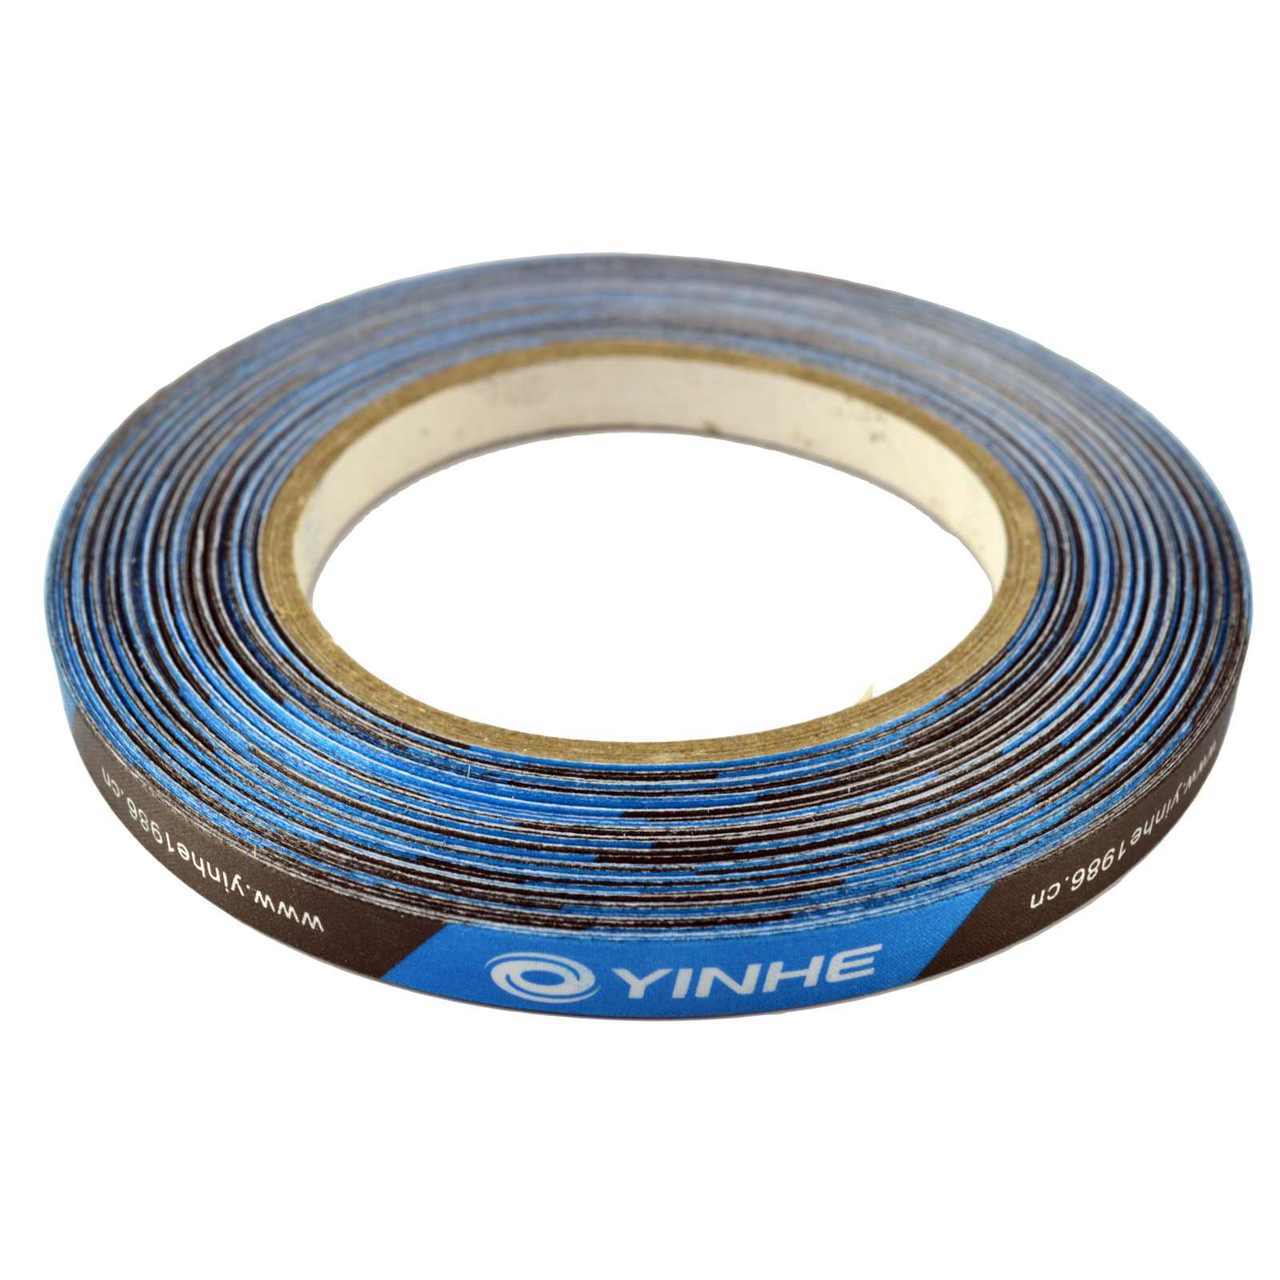 YINHE Edge Tape Roll 25m - Click Image to Close